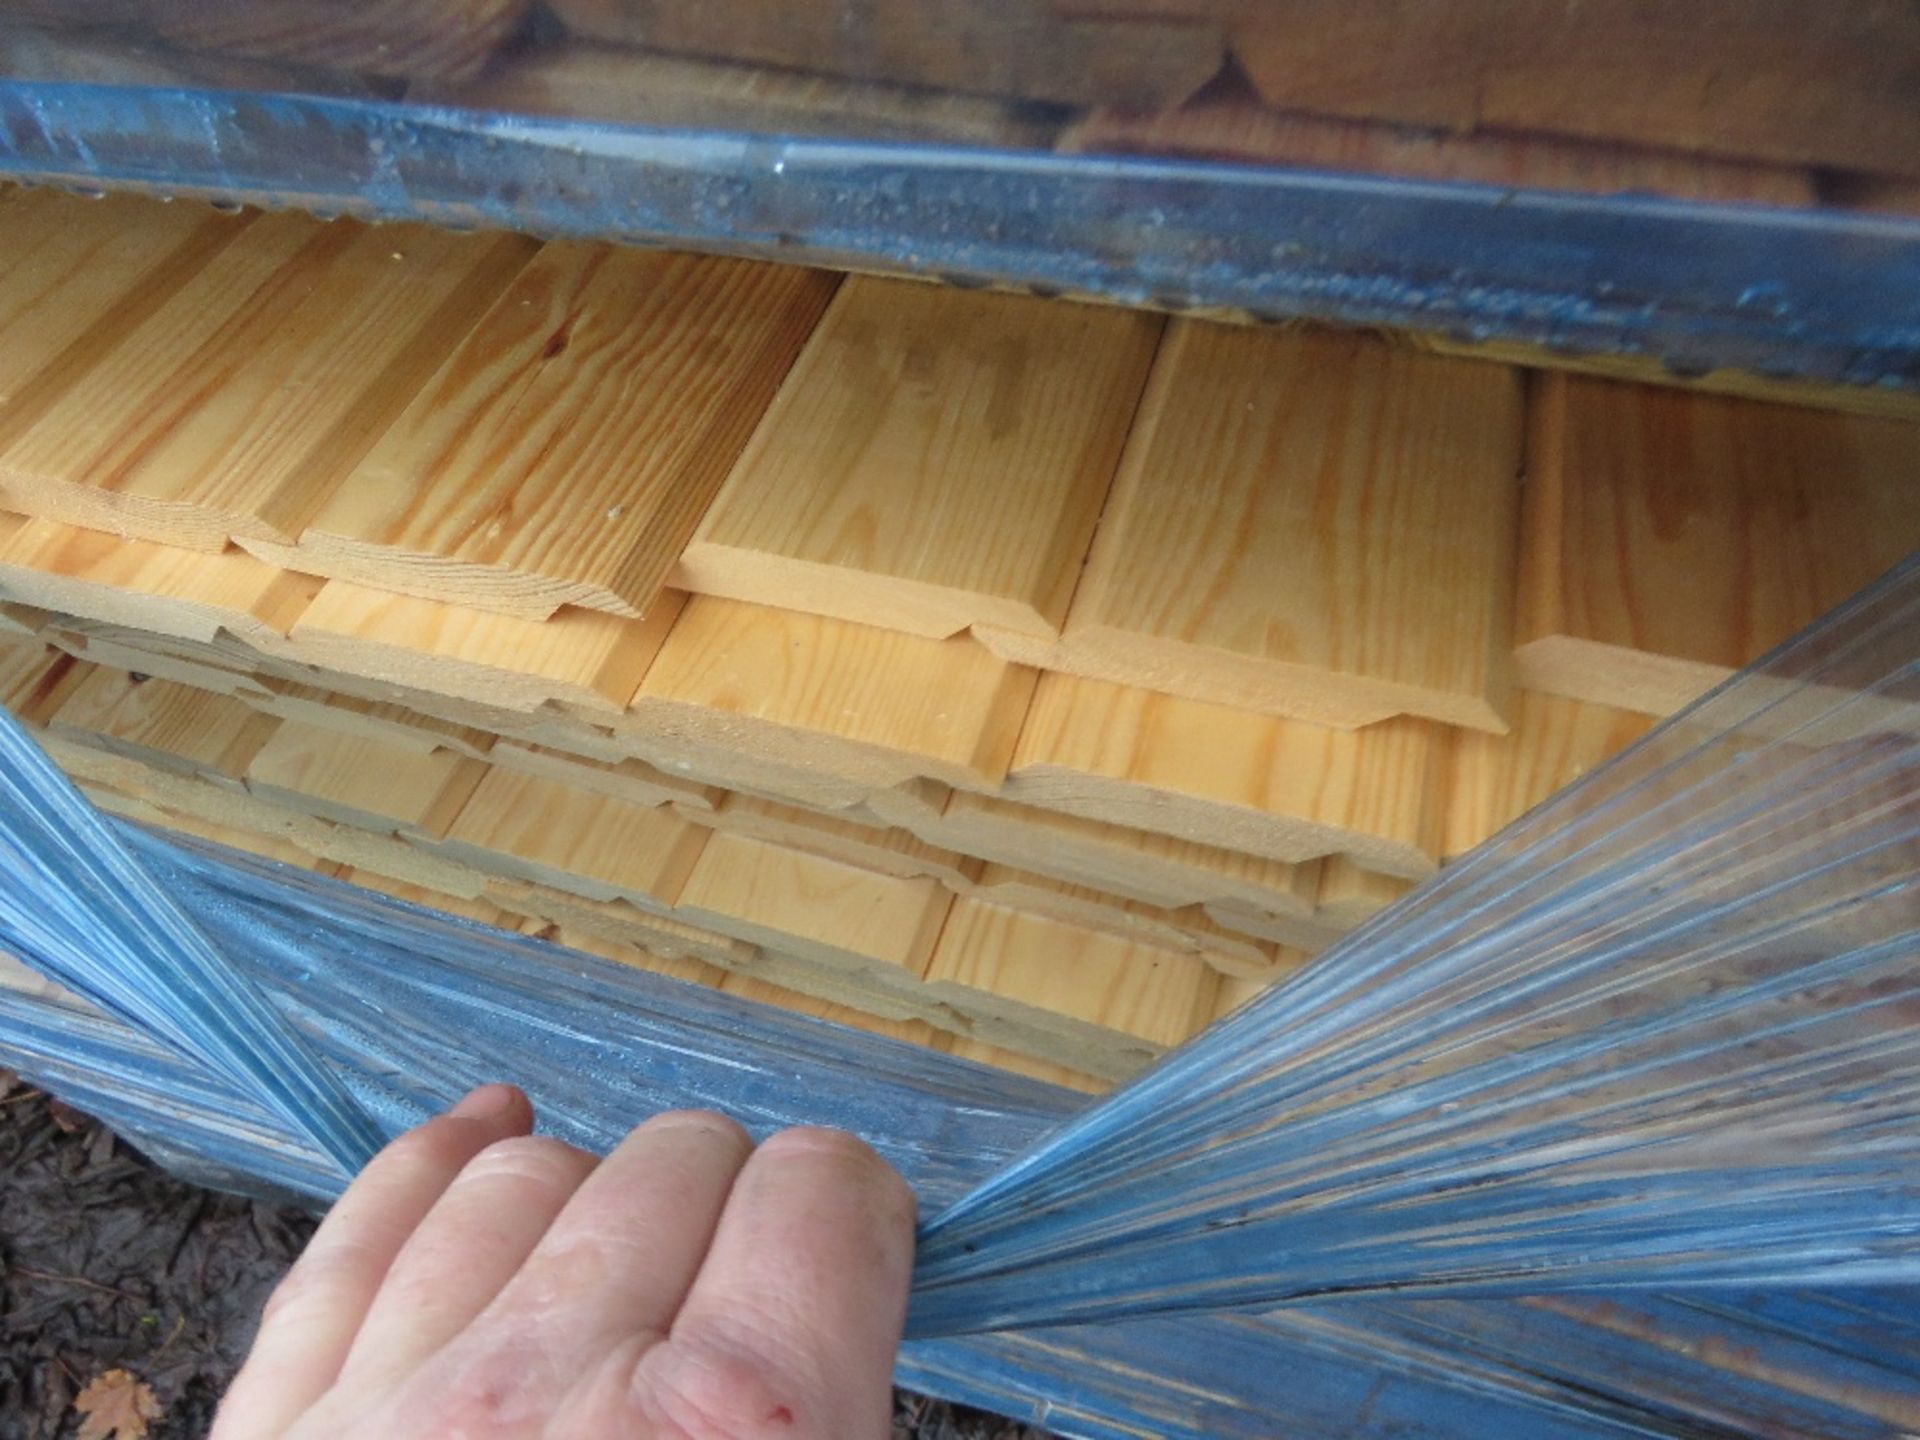 LARGE STACK (2 X PACKS) OF UNTREATED SHIPLAP TIMBER FENCING BOARDS: 1.72M LENGTH APPROX. - Image 3 of 3